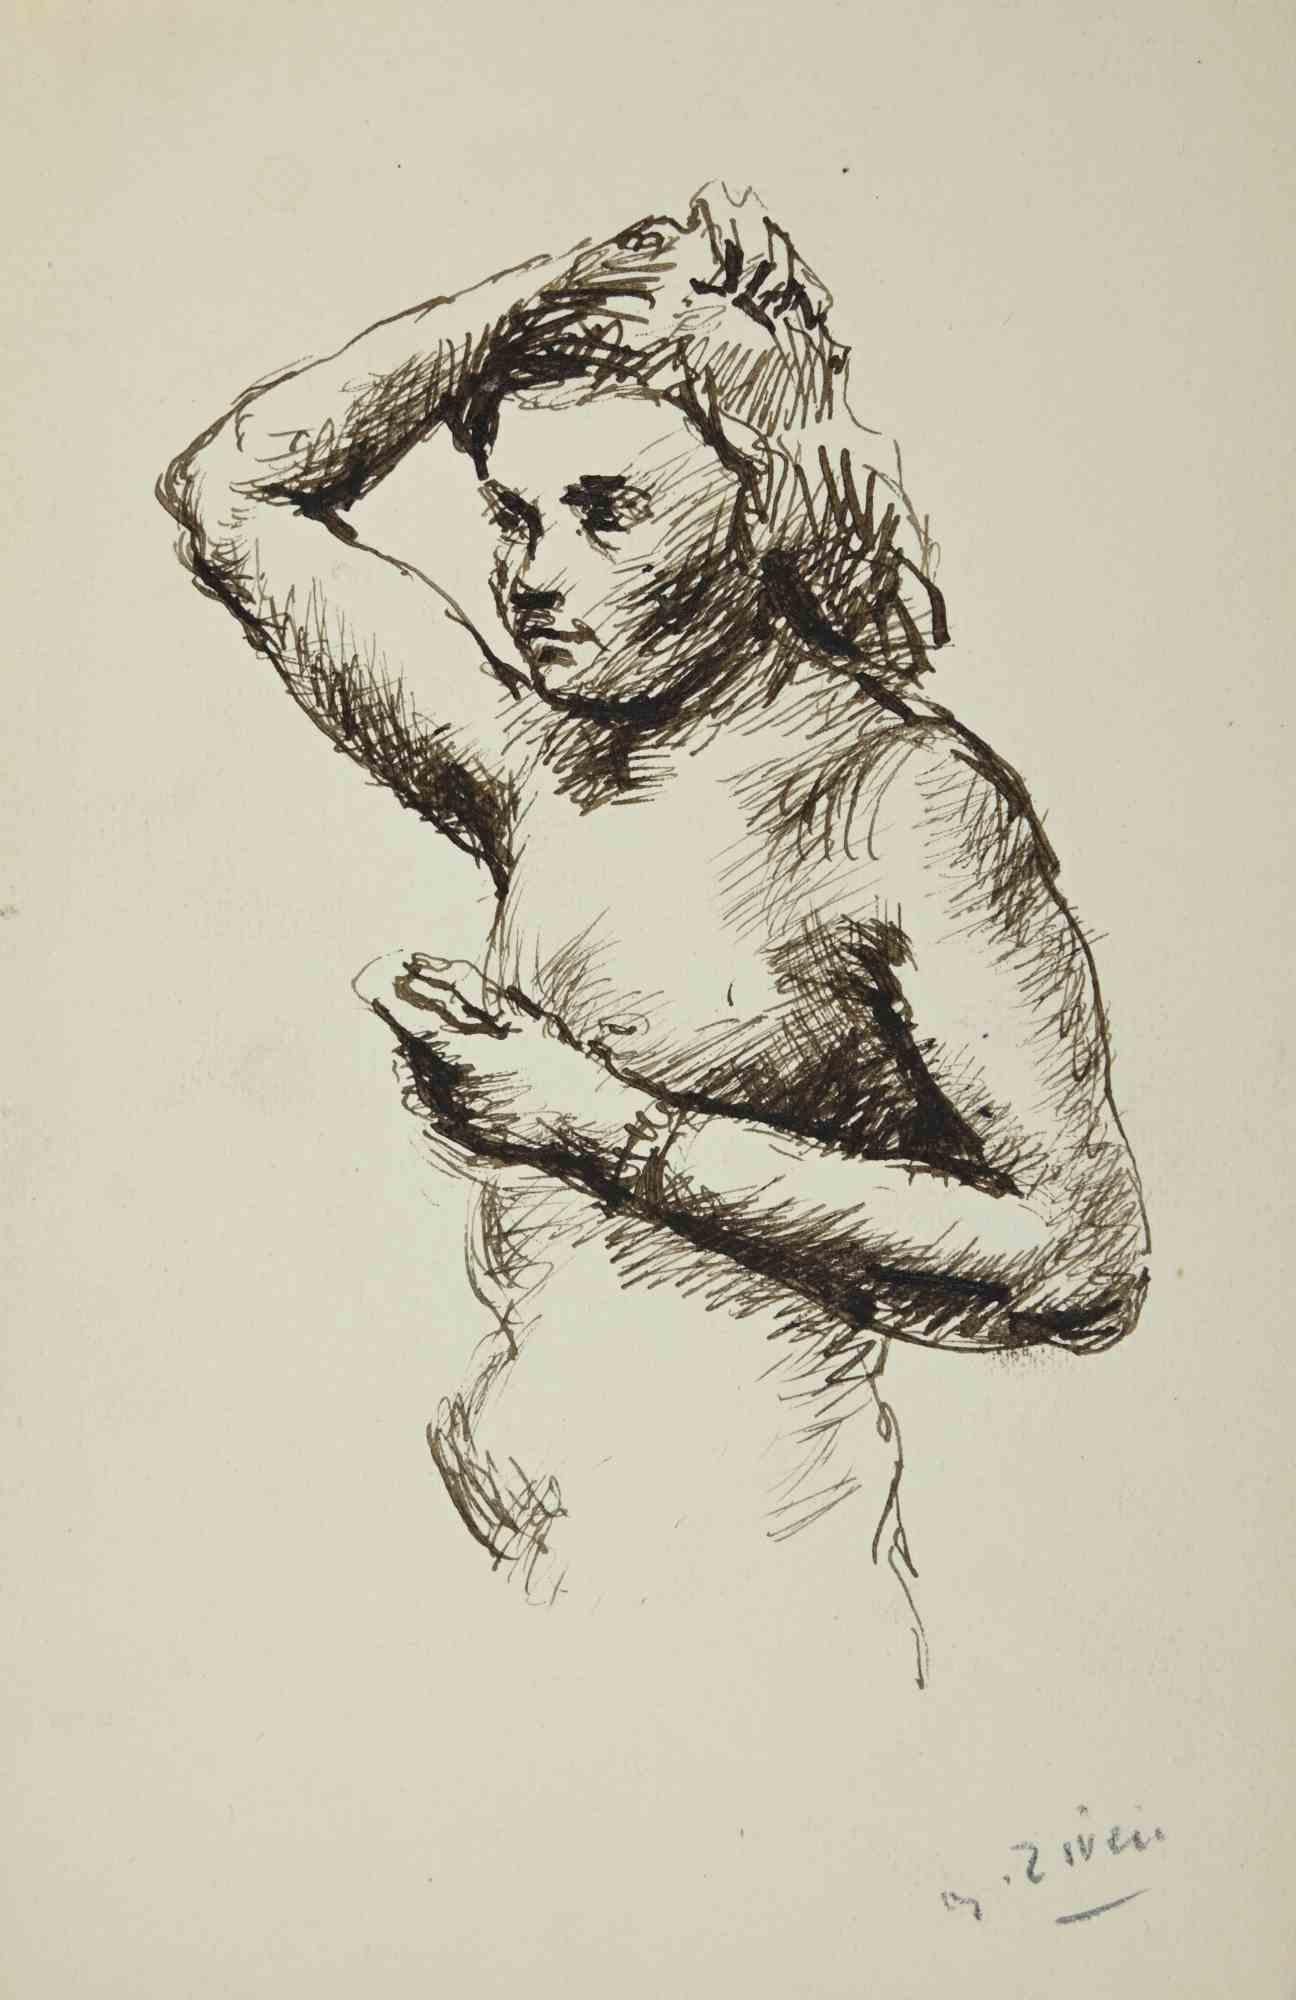 The Nude is a drawing realized by Alberto Ziveri in 1930s

Ink on paper

Hand-signed.

In good conditions. 

The artwork is represented through deft strokes masterly.

Alberto Ziveri (Rome,1908 – 1990), the Italian painter of the Roman school,